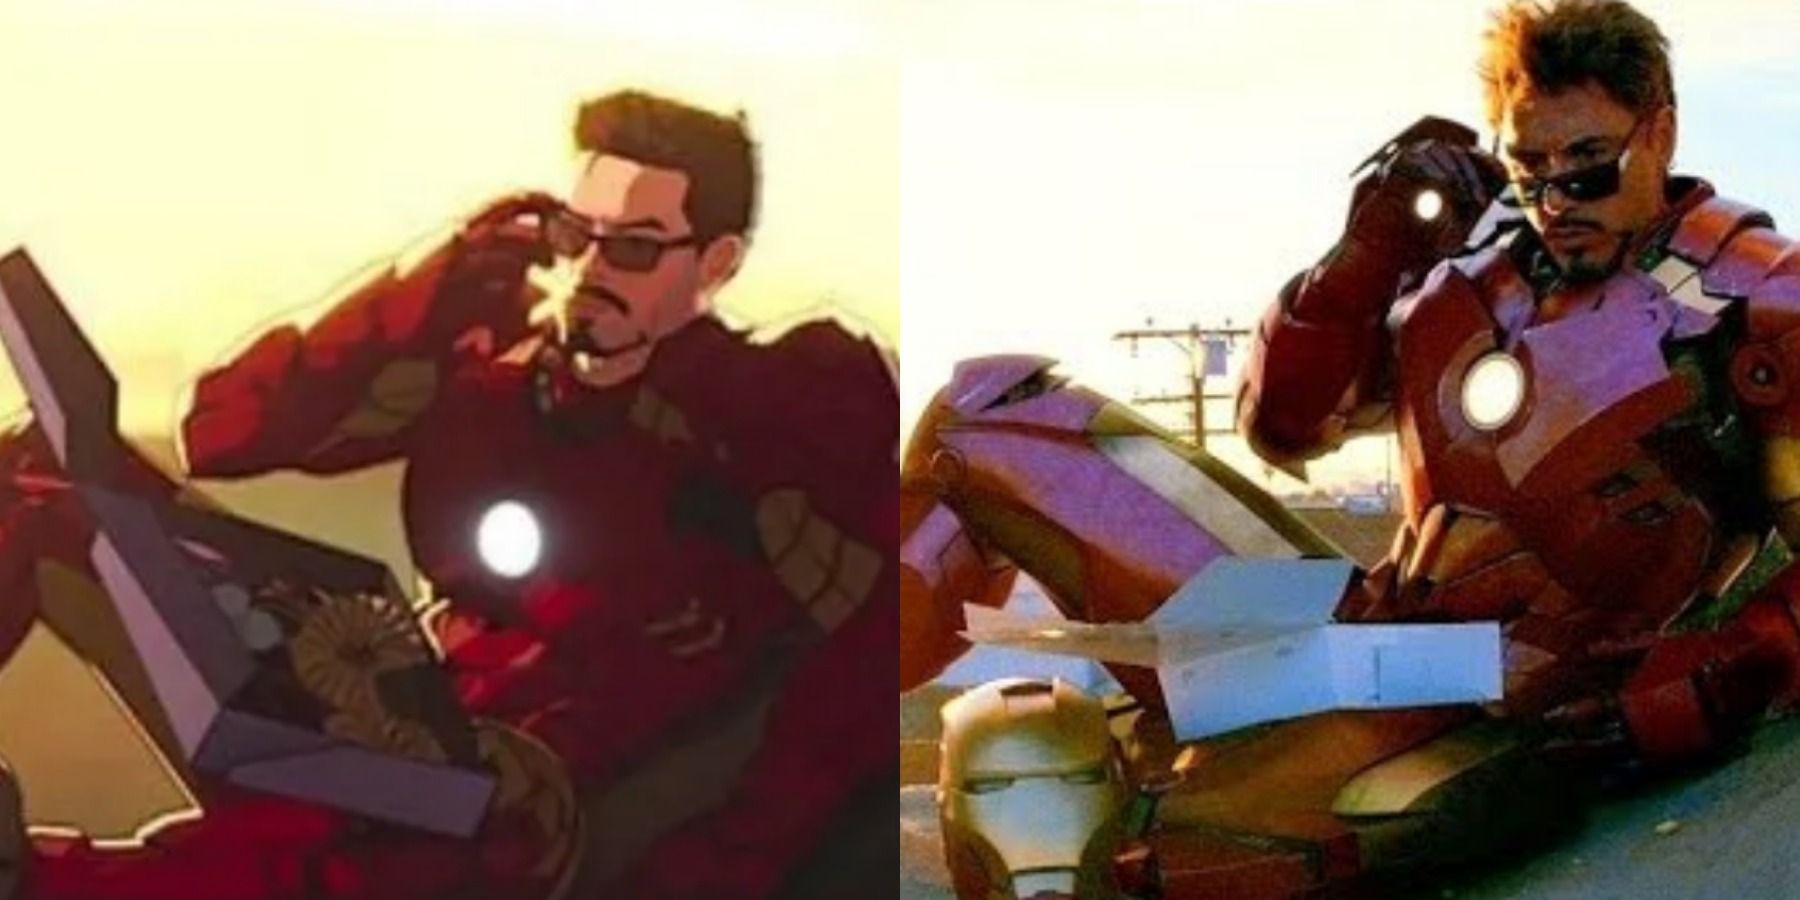 A split image depicts Tony Stark in What If Episode 3 and Iron Man 2 in the infamous donut scene